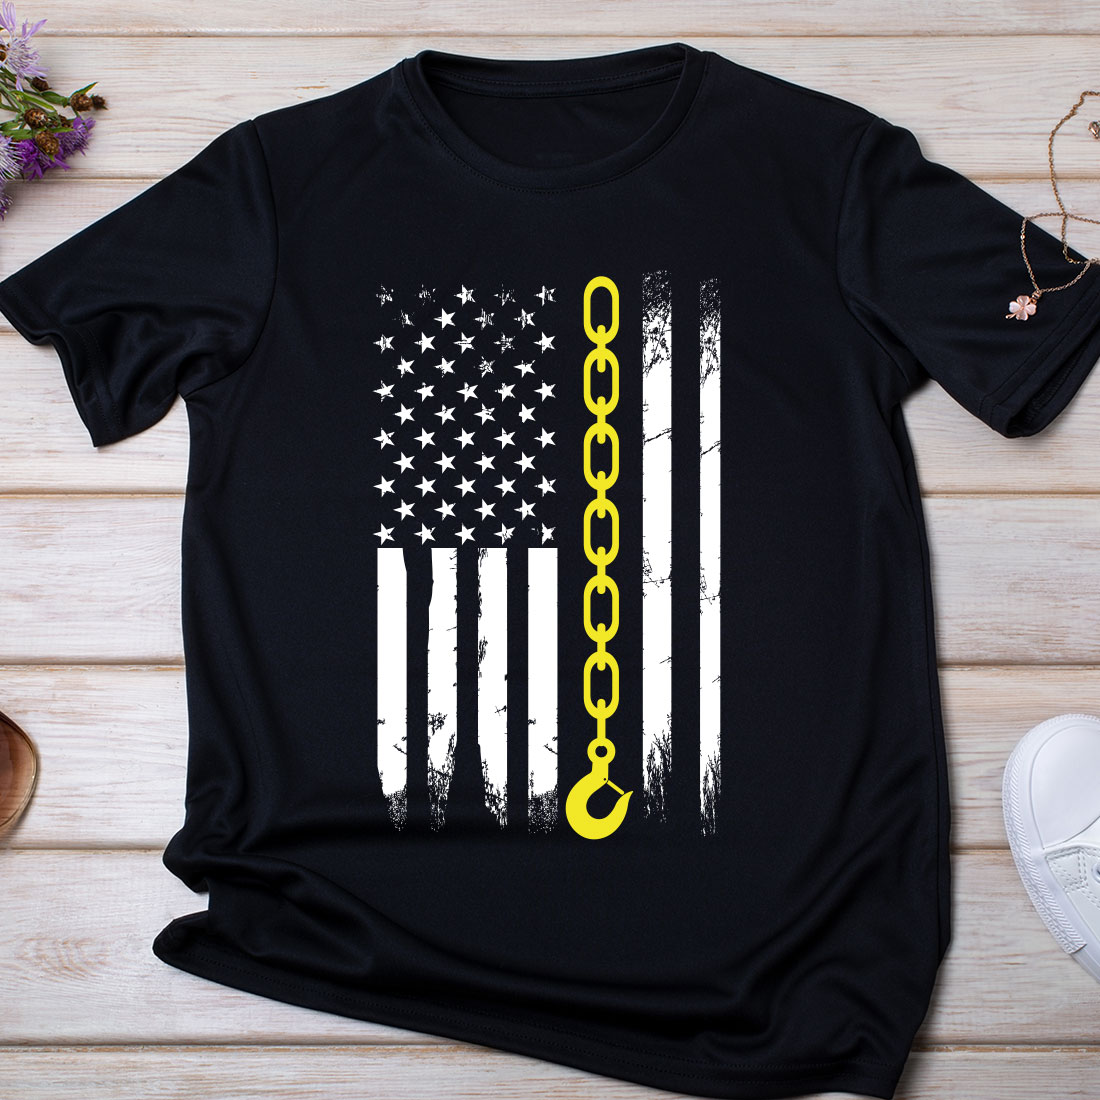 Black t - shirt with an american flag and a gold key on it.